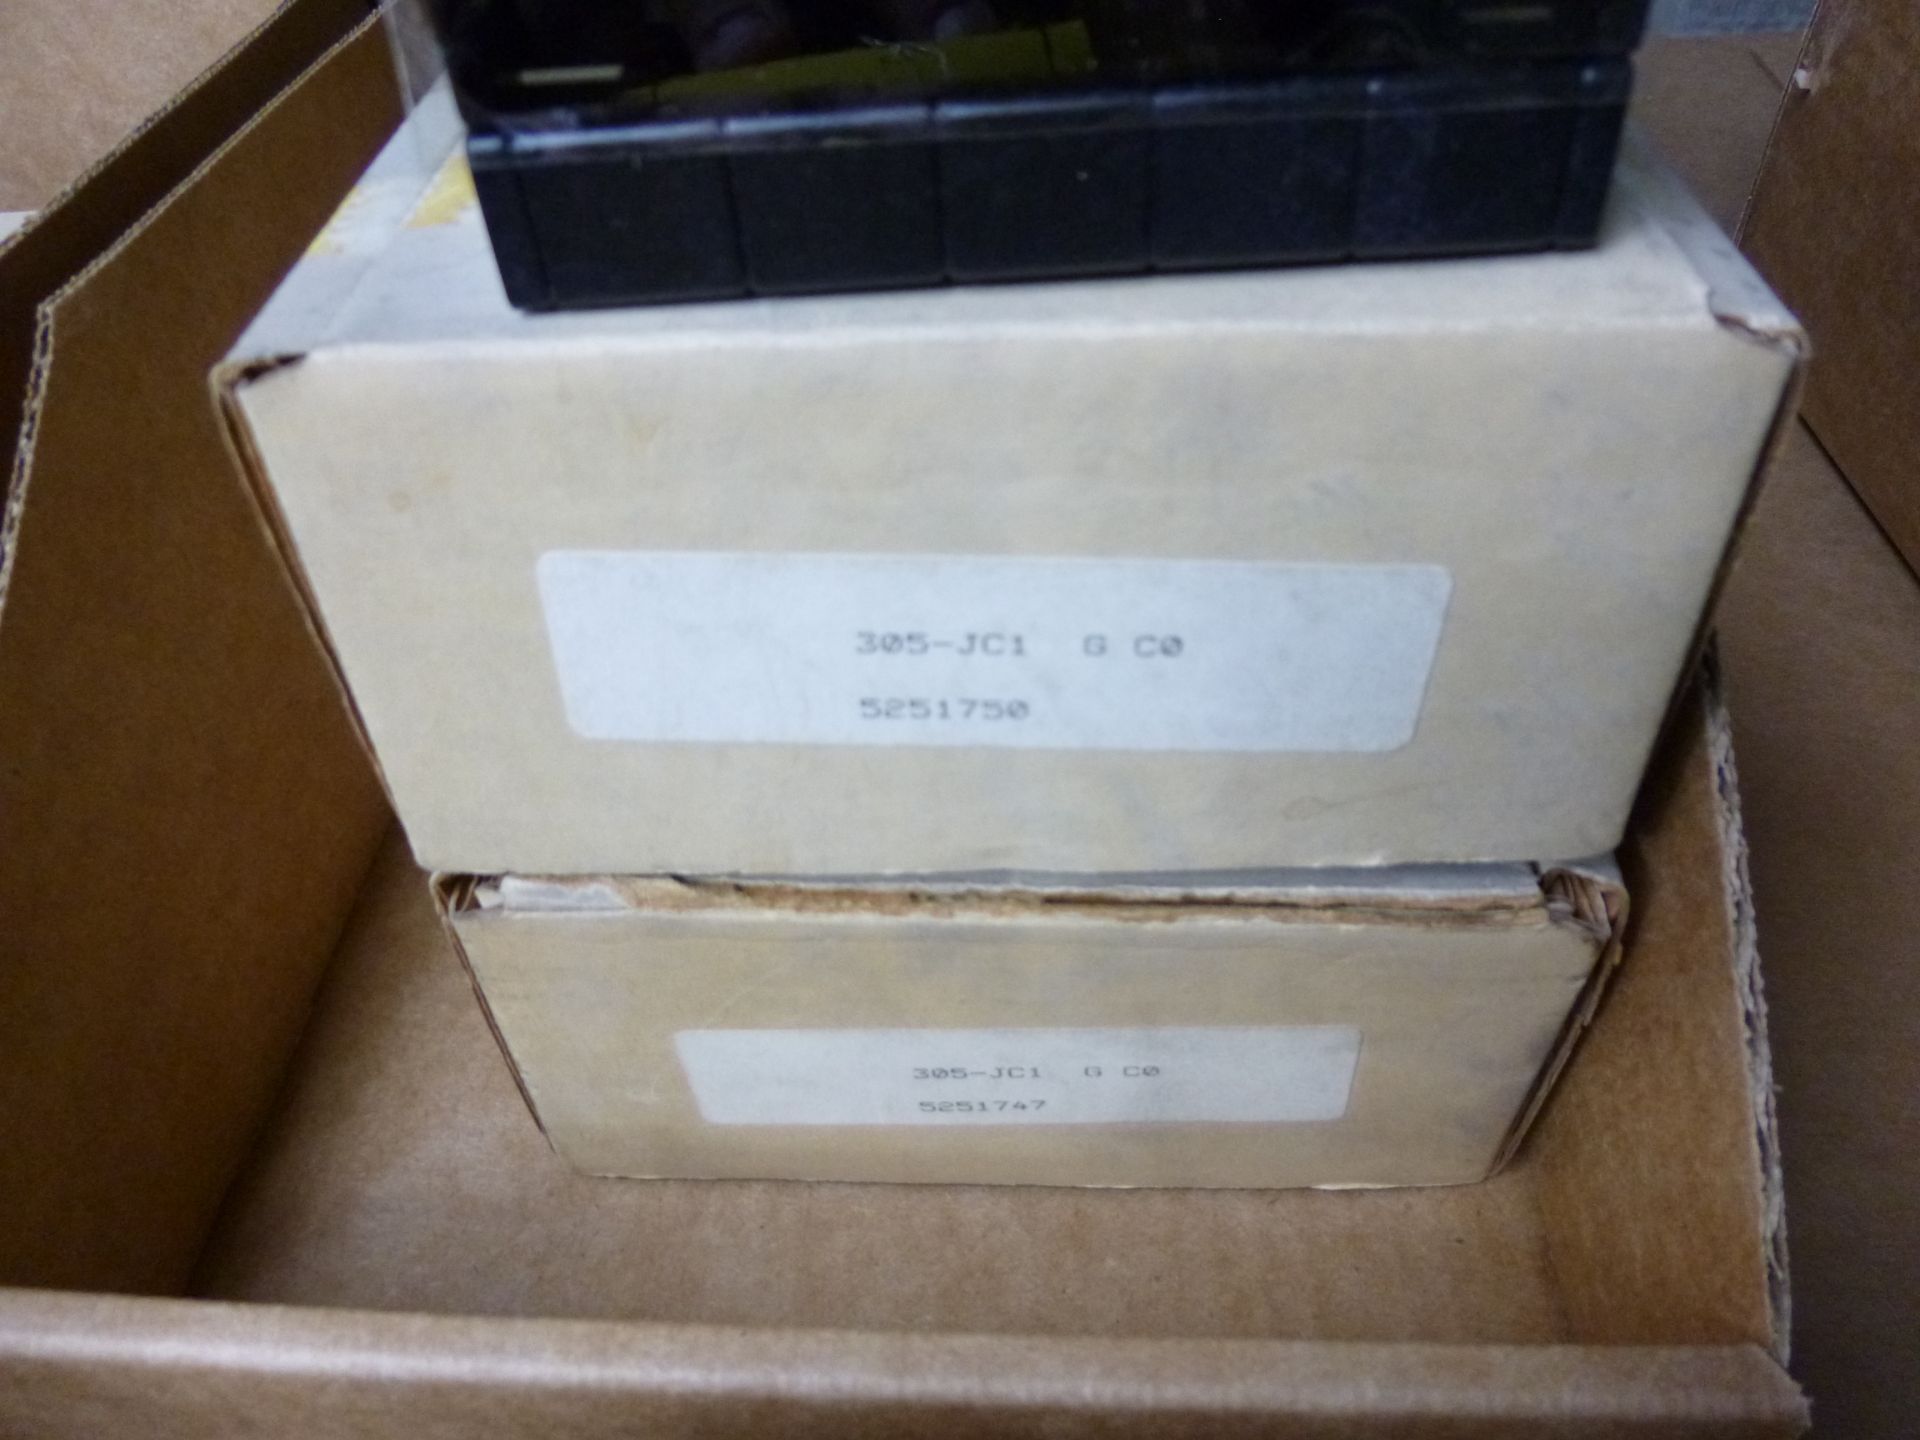 (Qty 2) Newport 305-JC1-G-C0 panel meter LED (new in boxes) Shipping can be prepared for either - Image 2 of 2